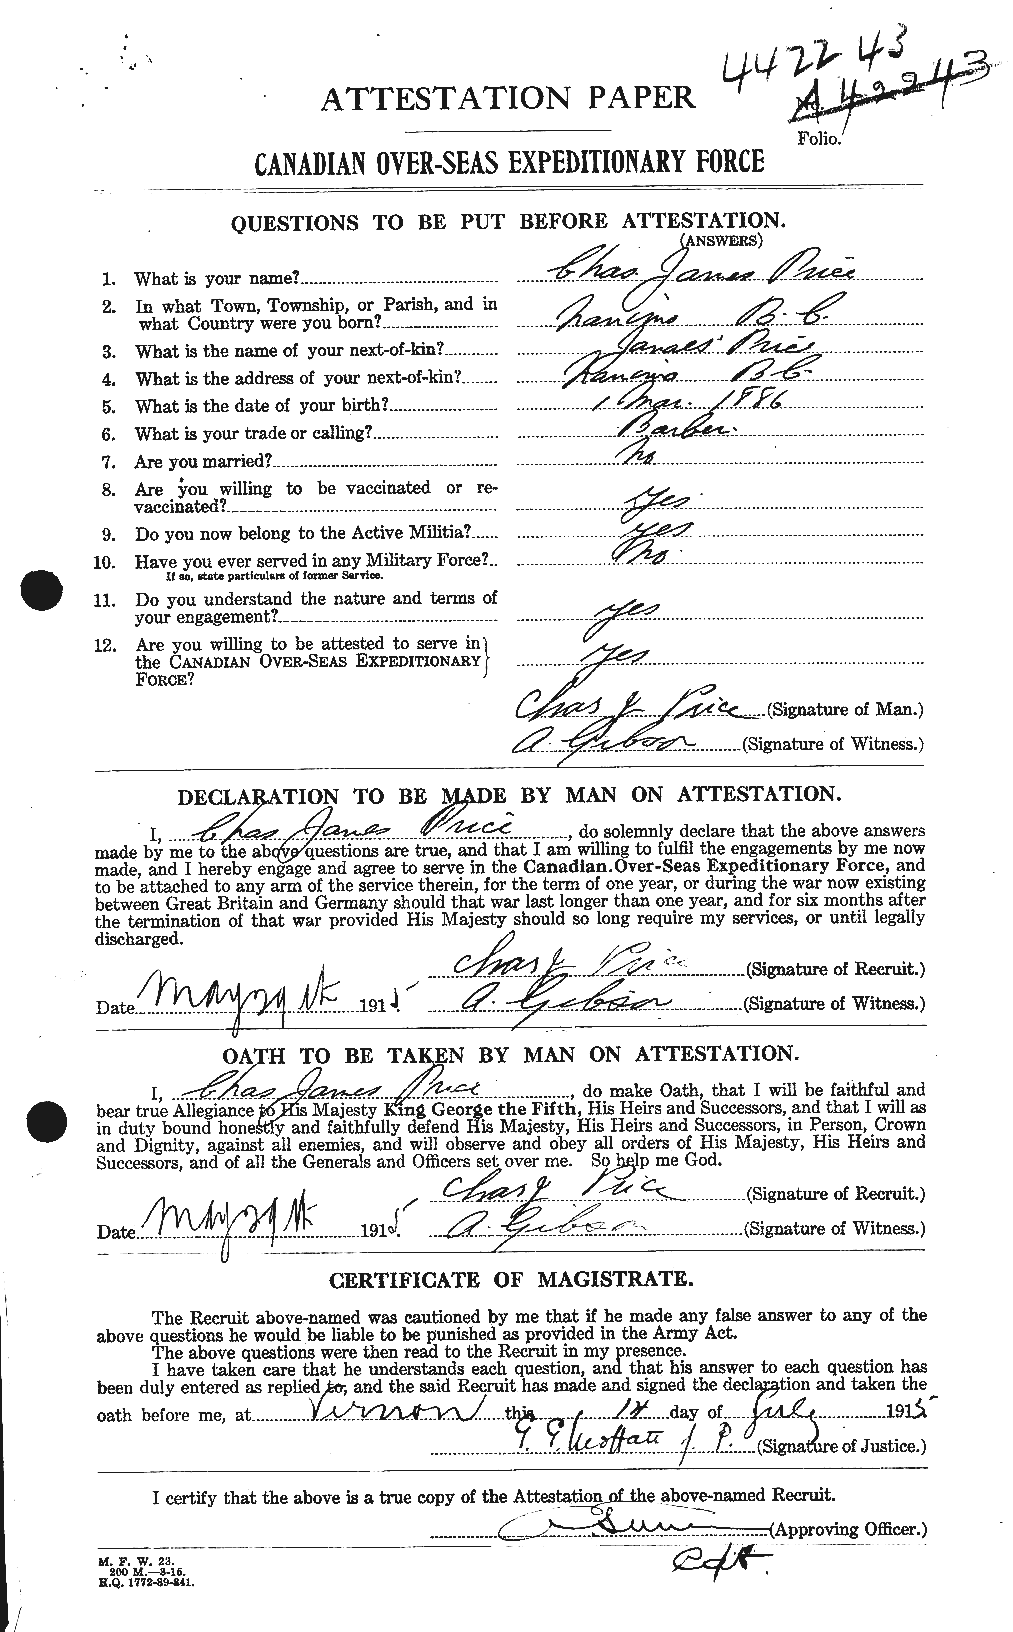 Personnel Records of the First World War - CEF 586982a